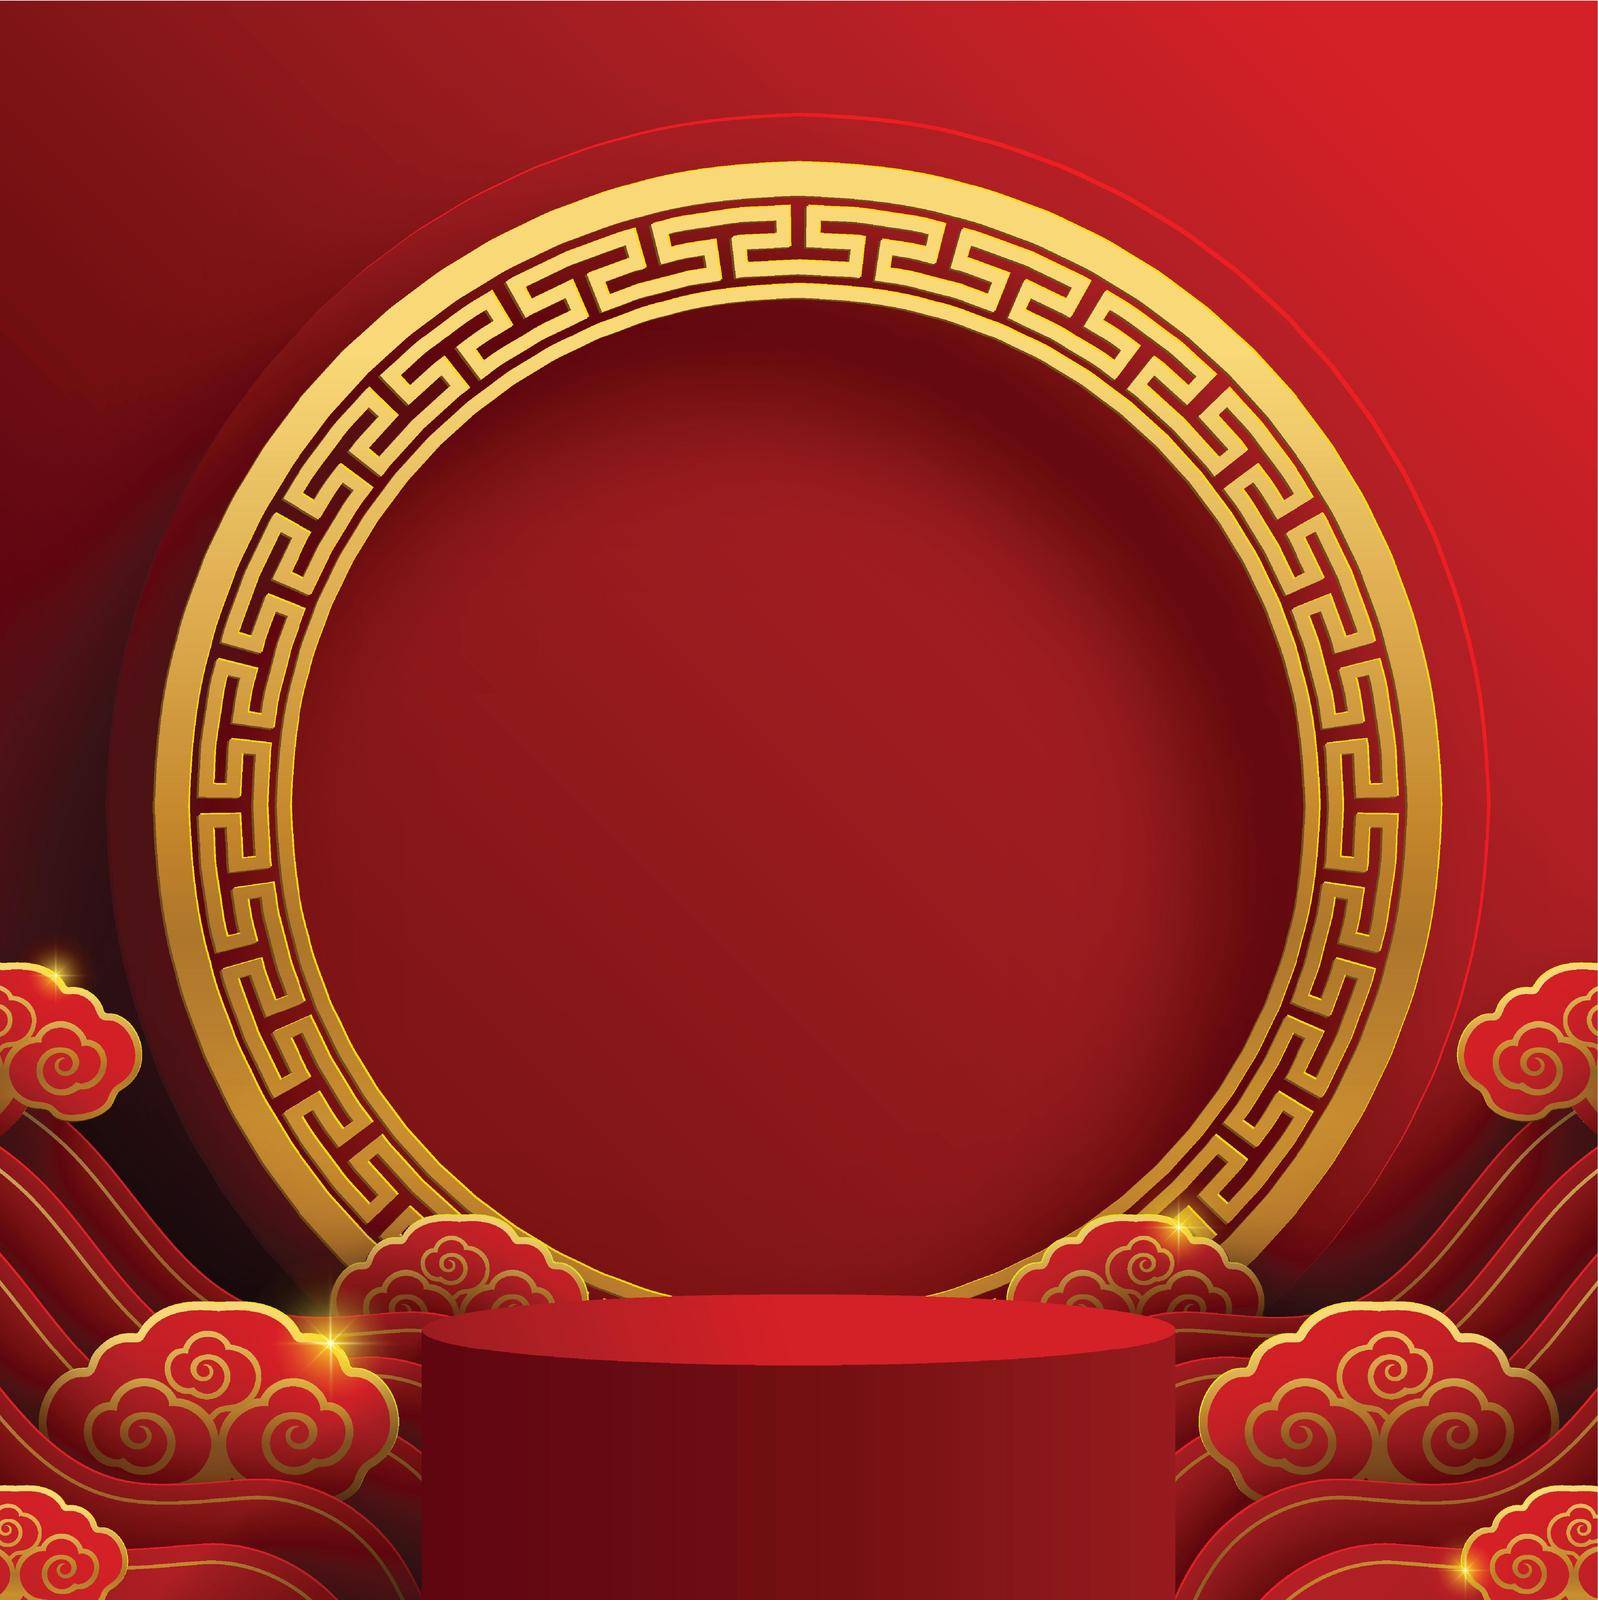 Podium round stage podium and paper art Chinese new year,Chinese Festivals, Mid Autumn Festival , red paper cut ,flower and asian elements with craft style on background.